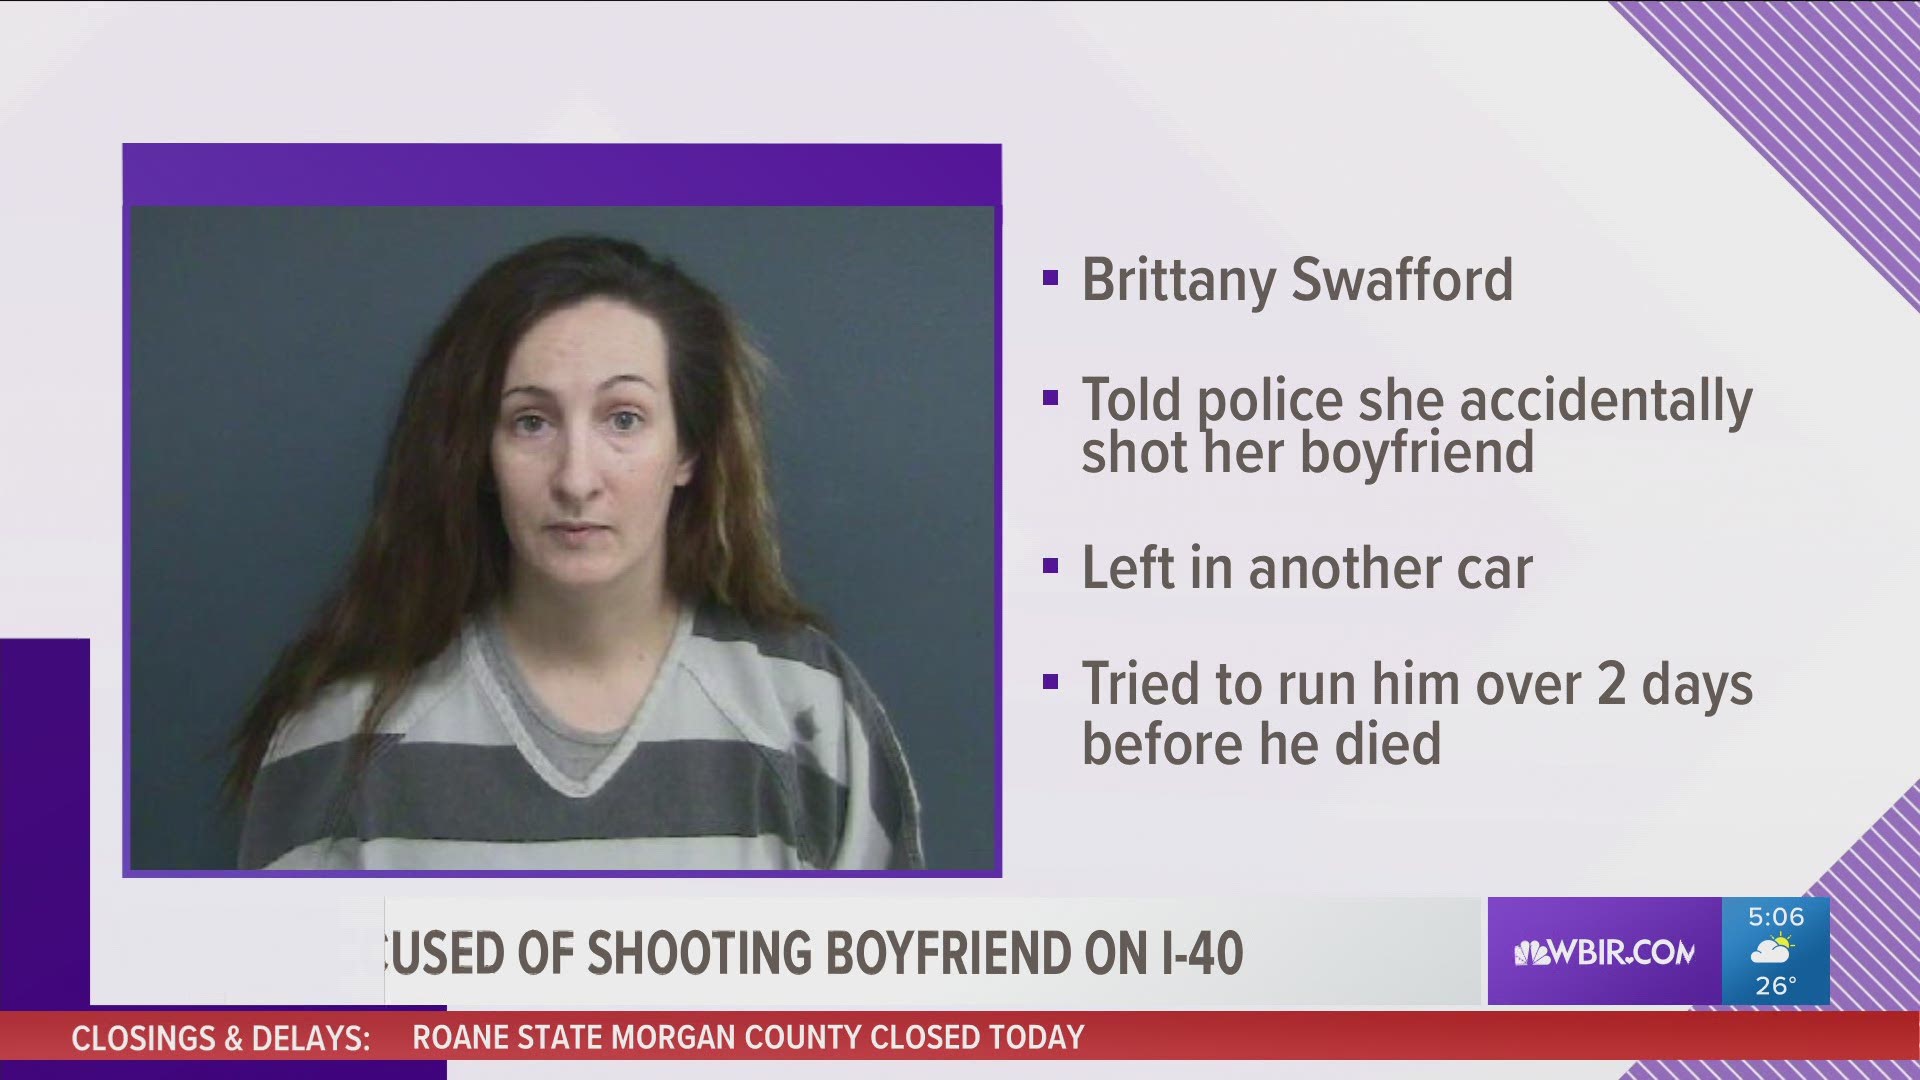 The woman is accused of shooting her boyfriend on I-40 and trying to make it look like an accident.